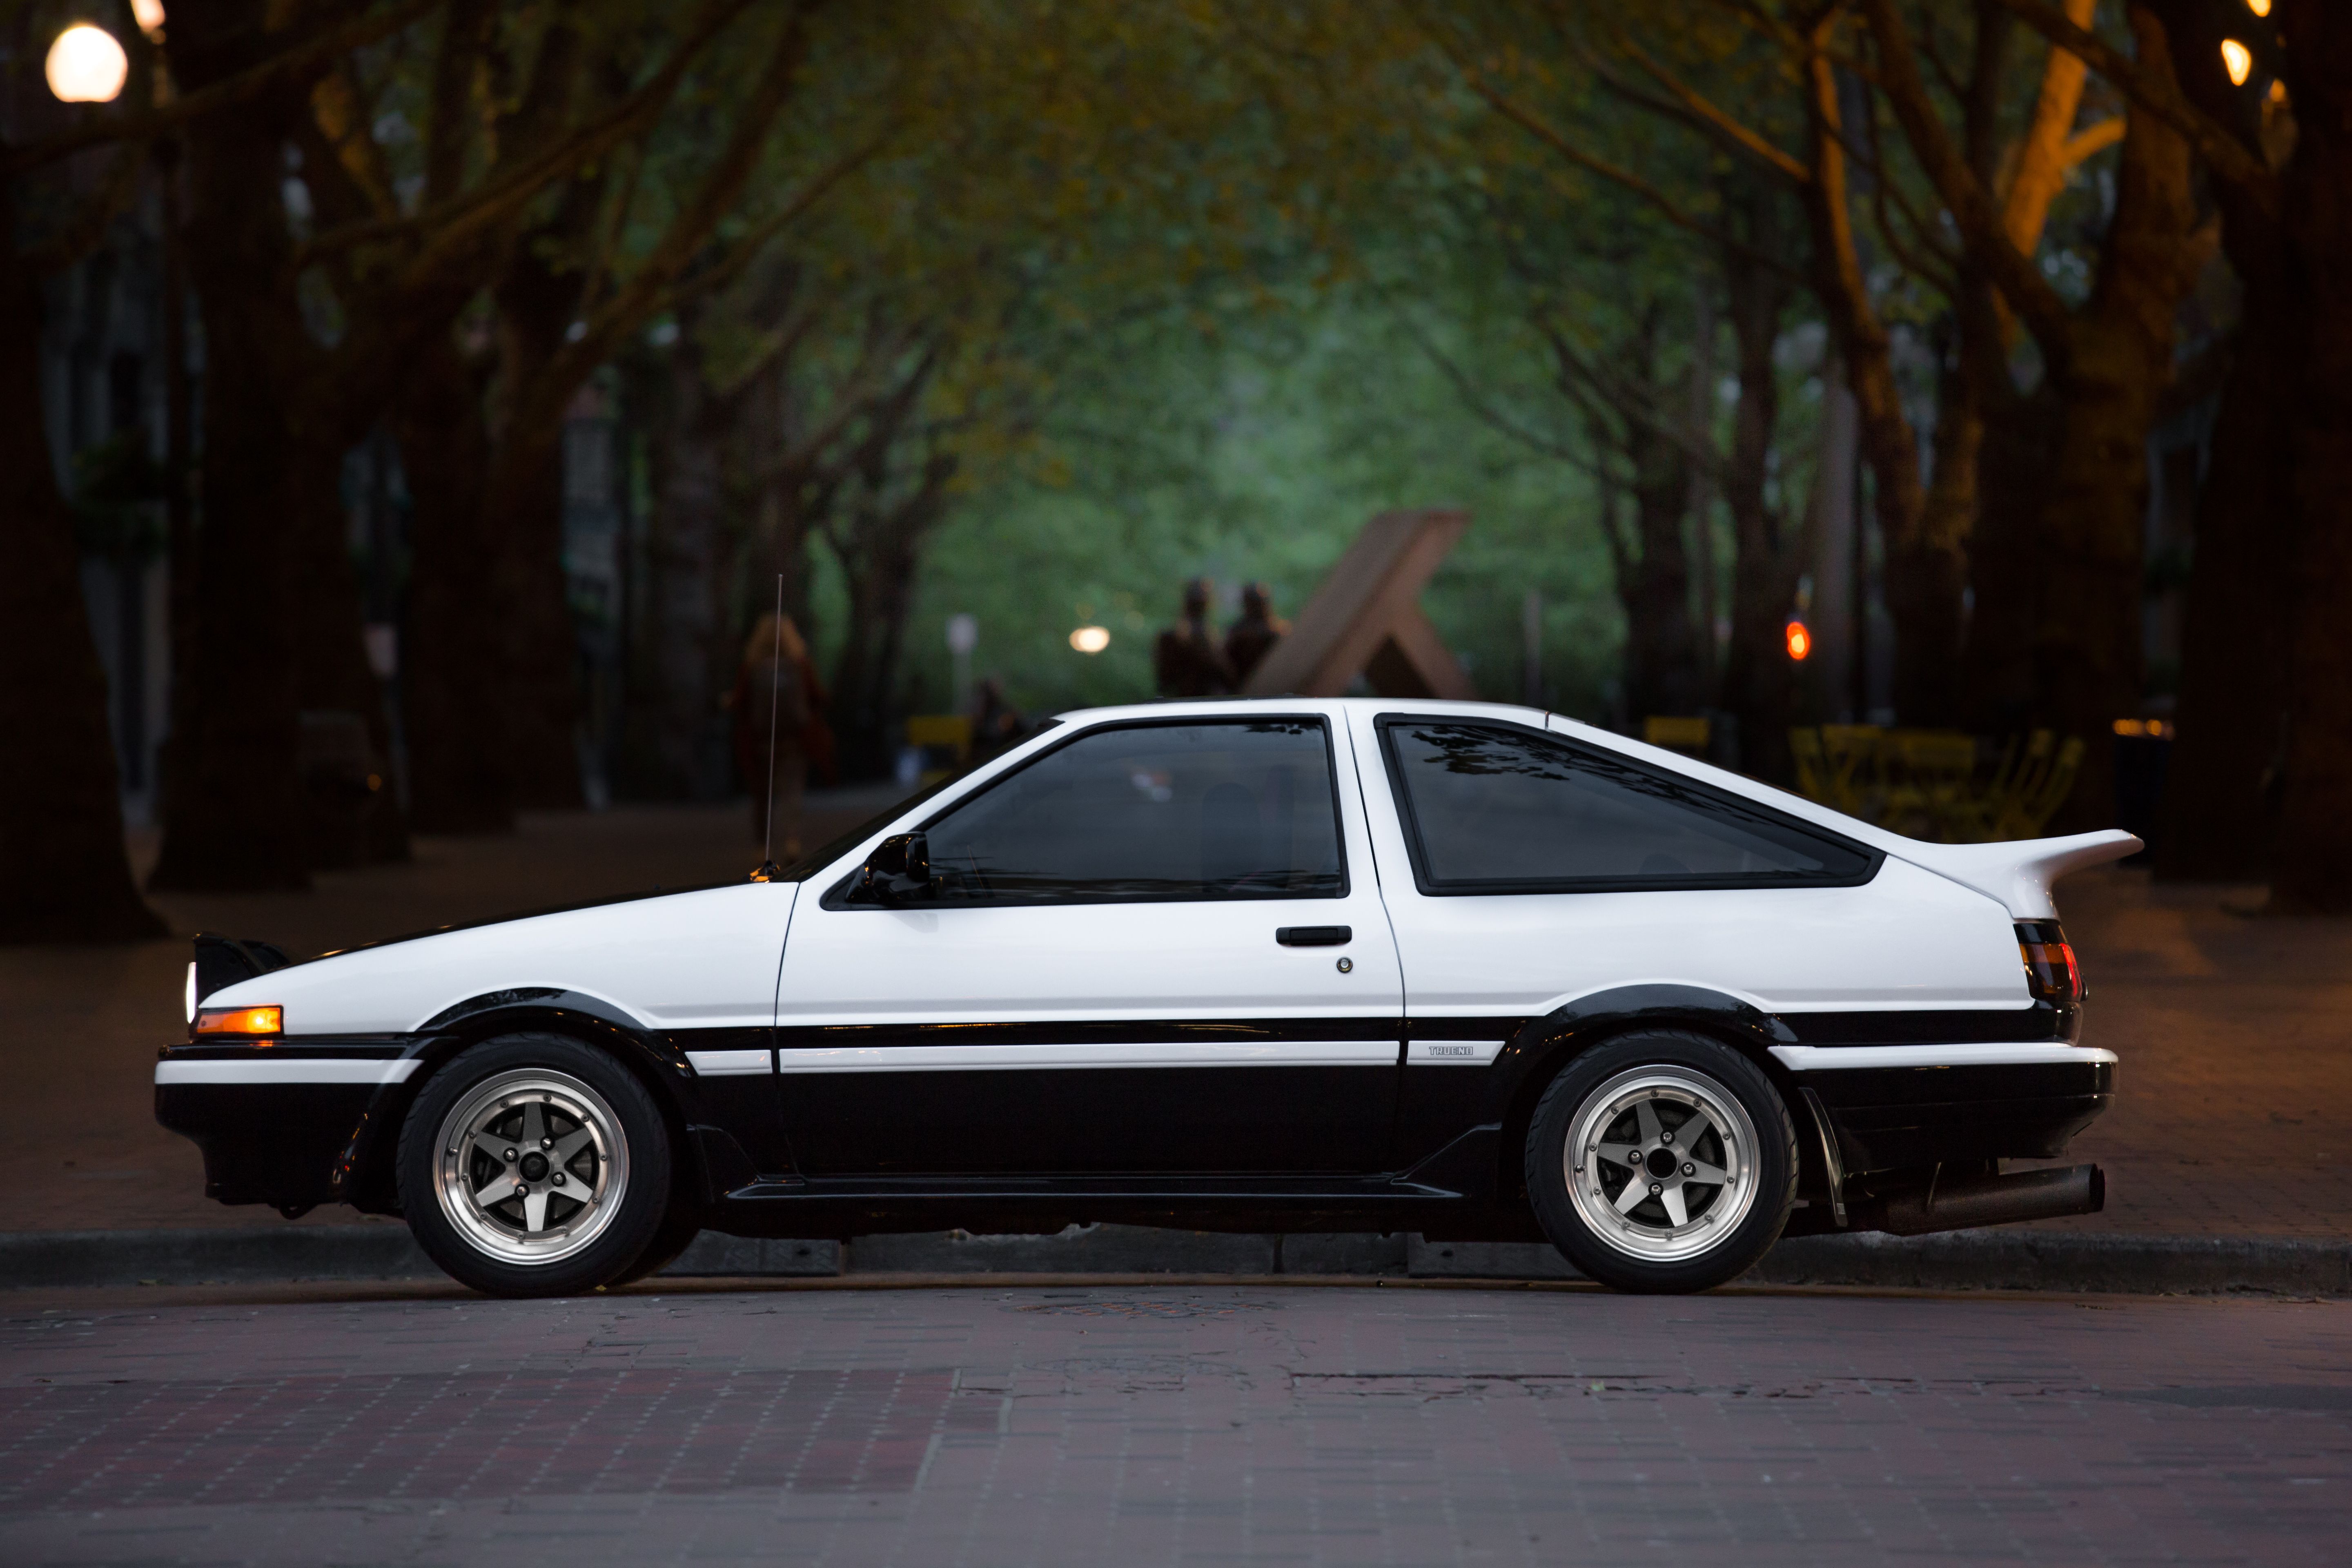 Your Ridiculously Awesome Toyota AE86 Wallpaper Is Here. Ae Toyota, Automotive news